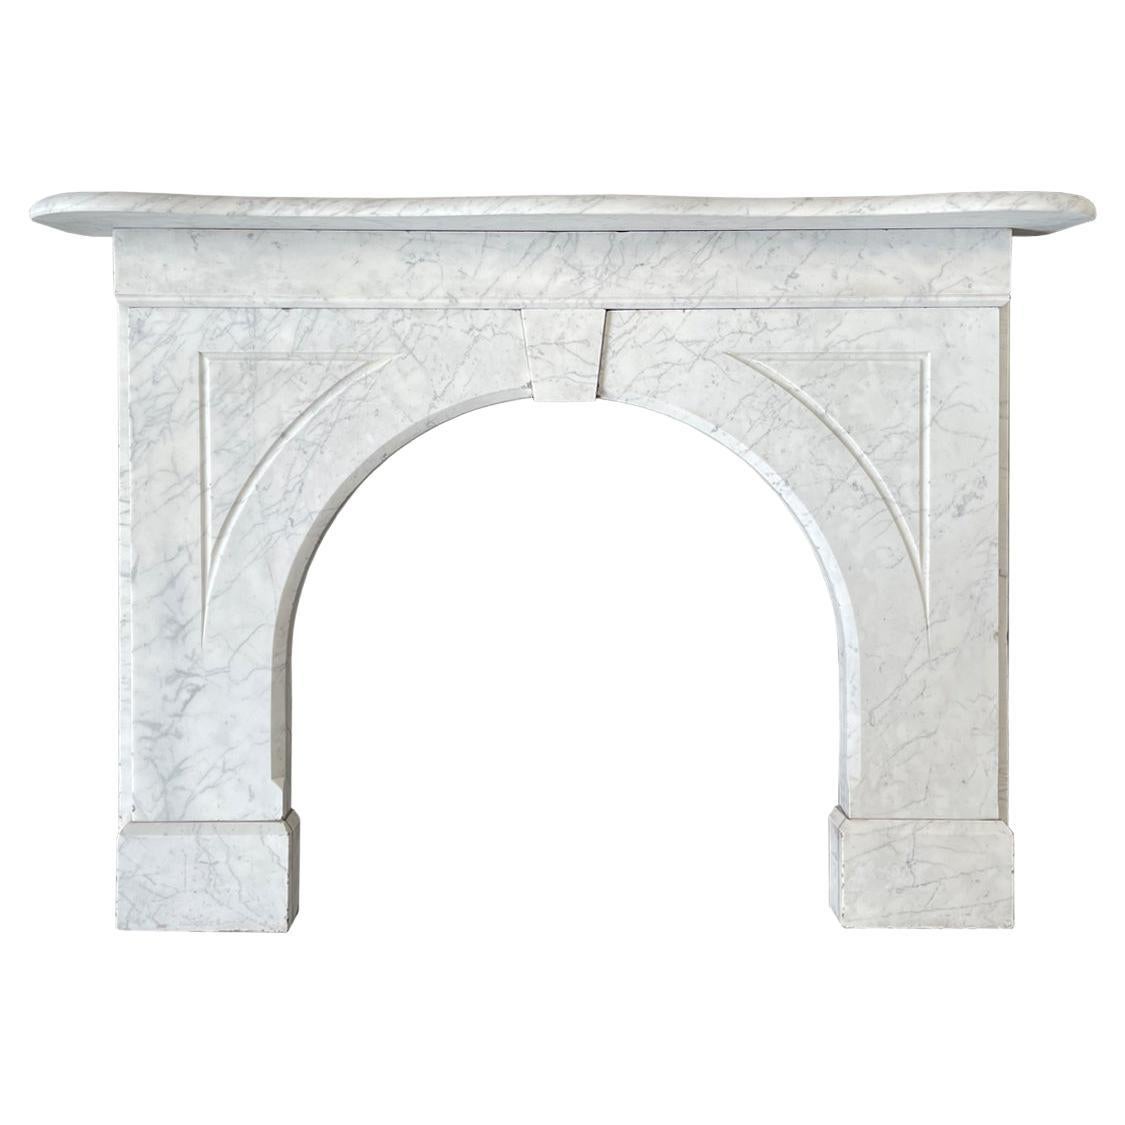 Reclaimed Arched Victorian Carrara Marble Fireplace Surround